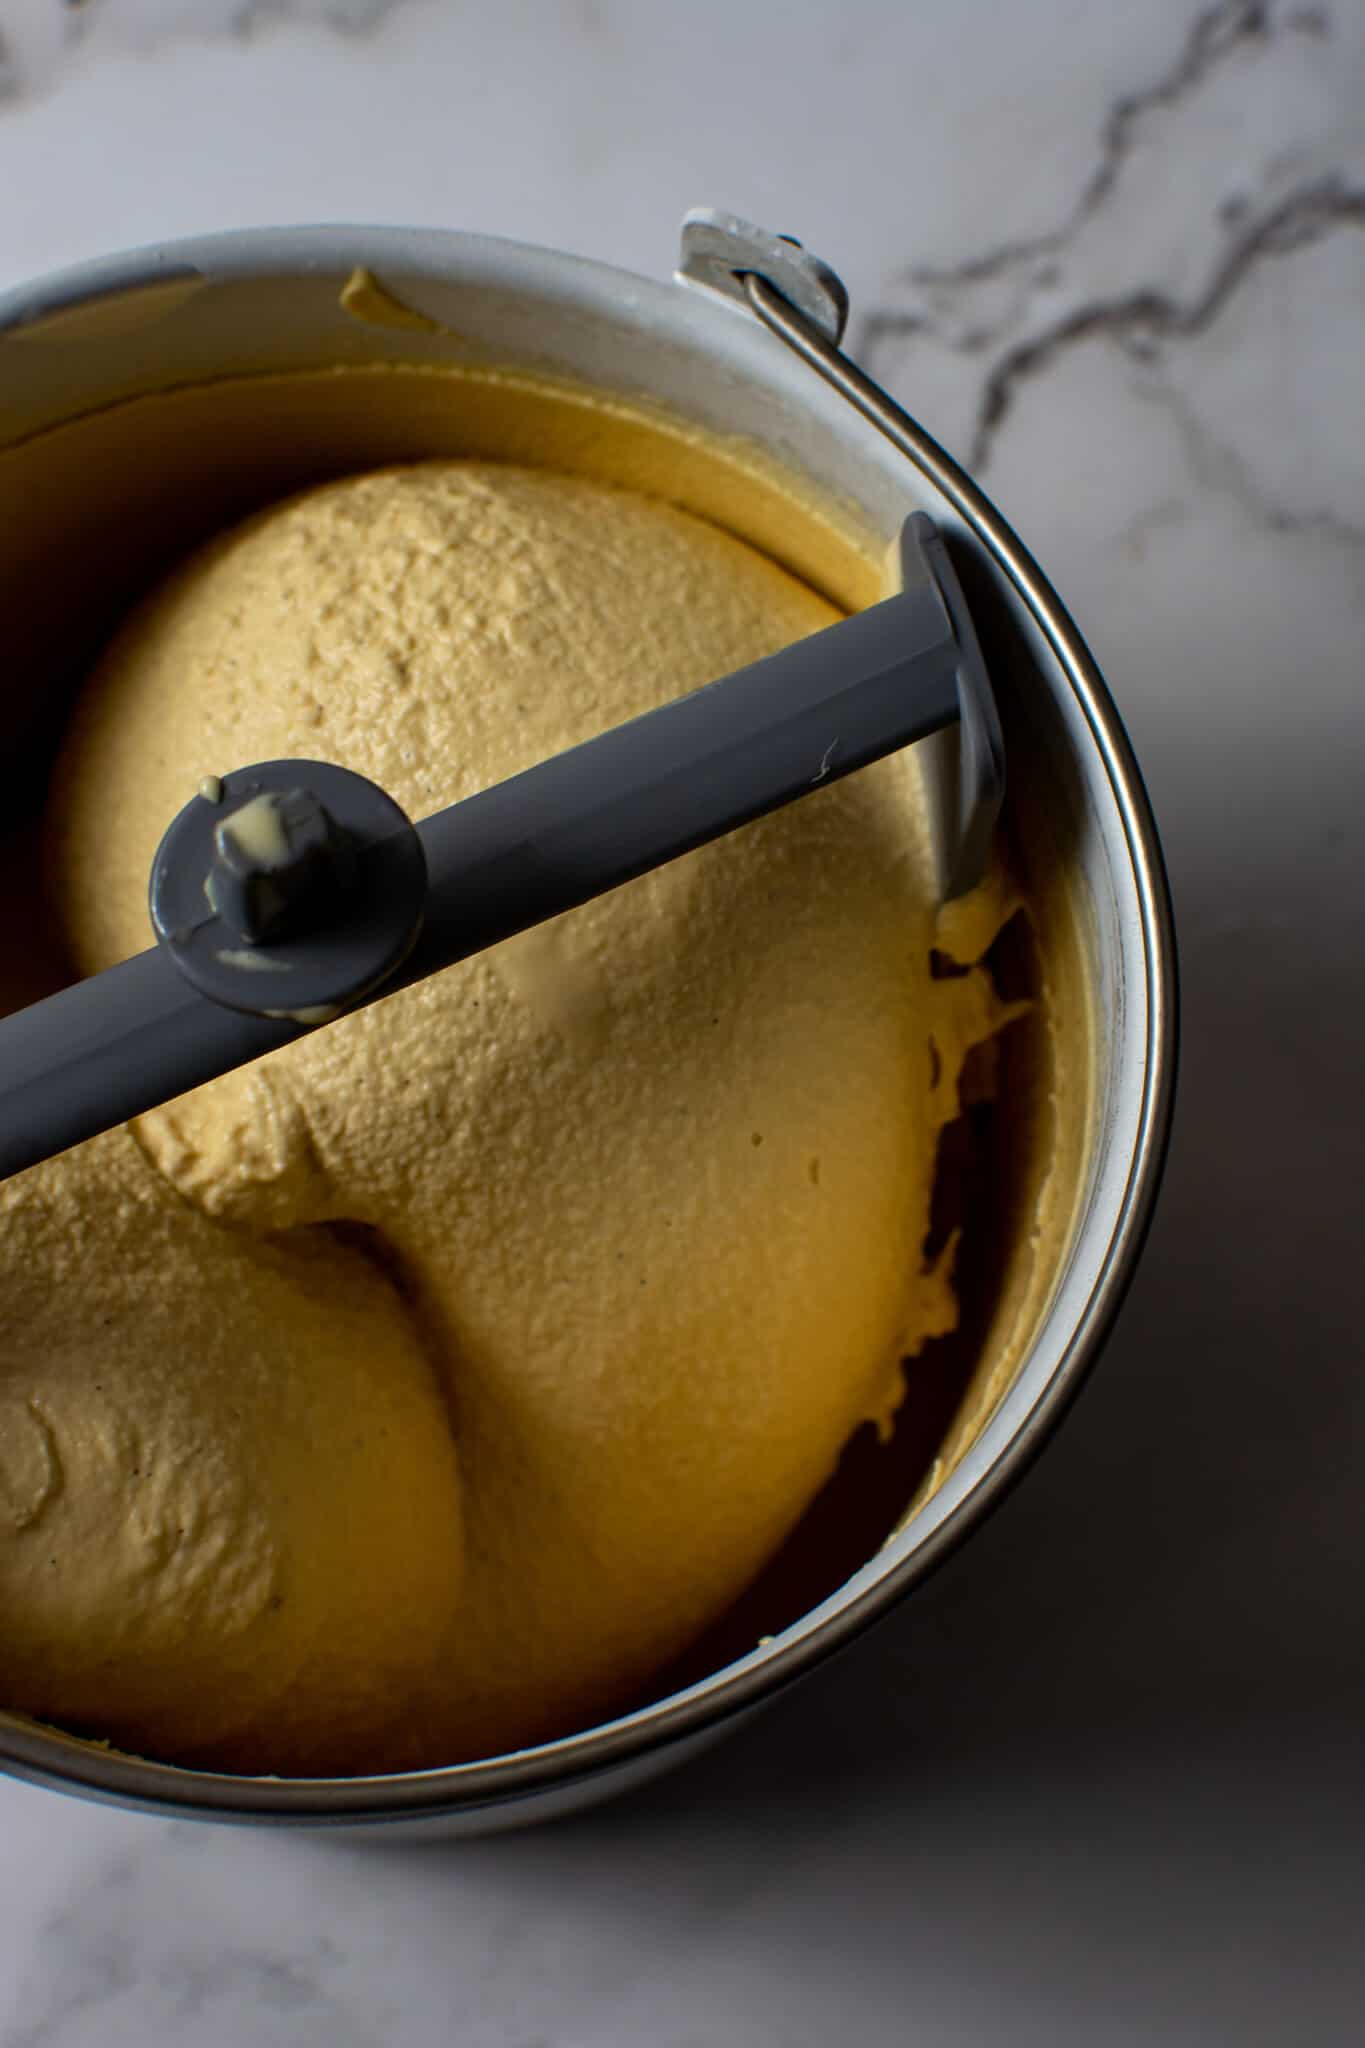 Caramelised White Chocolate Ice-Cream on kitchen counter top